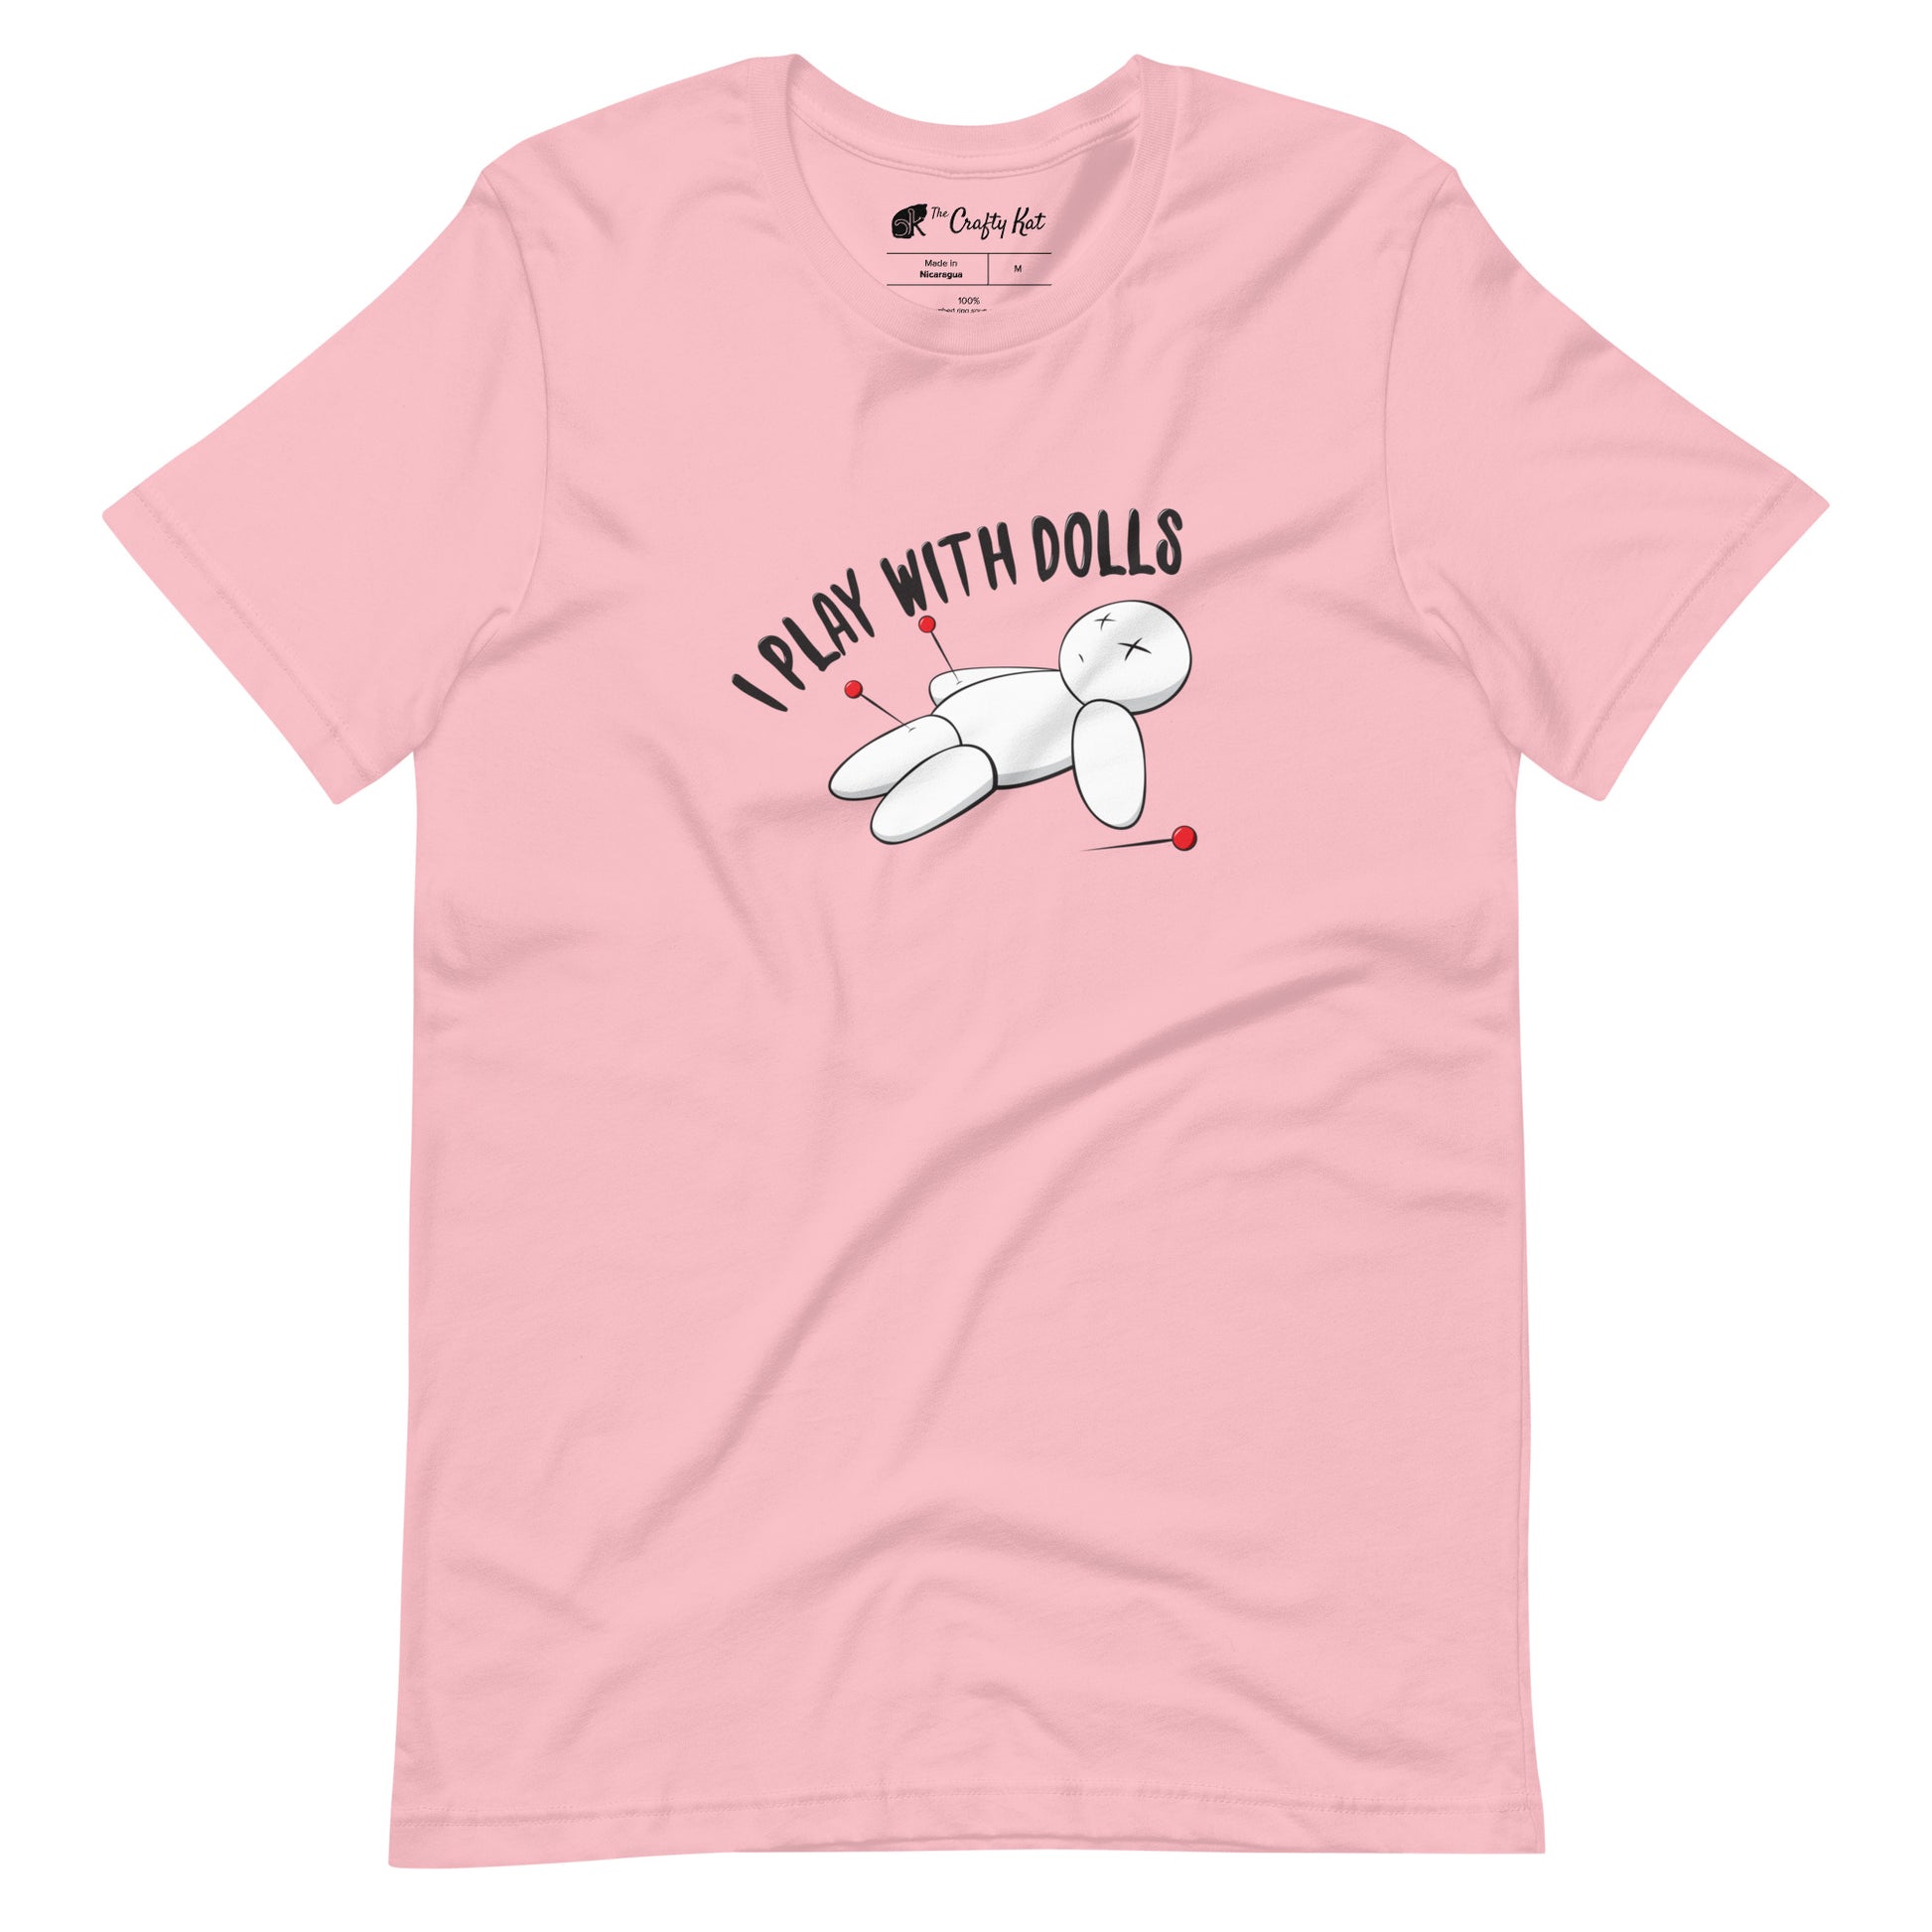 Pink t-shirt with graphic of white voodoo doll with Xs for eyes stuck with several pins and text "I PLAY WITH DOLLS"